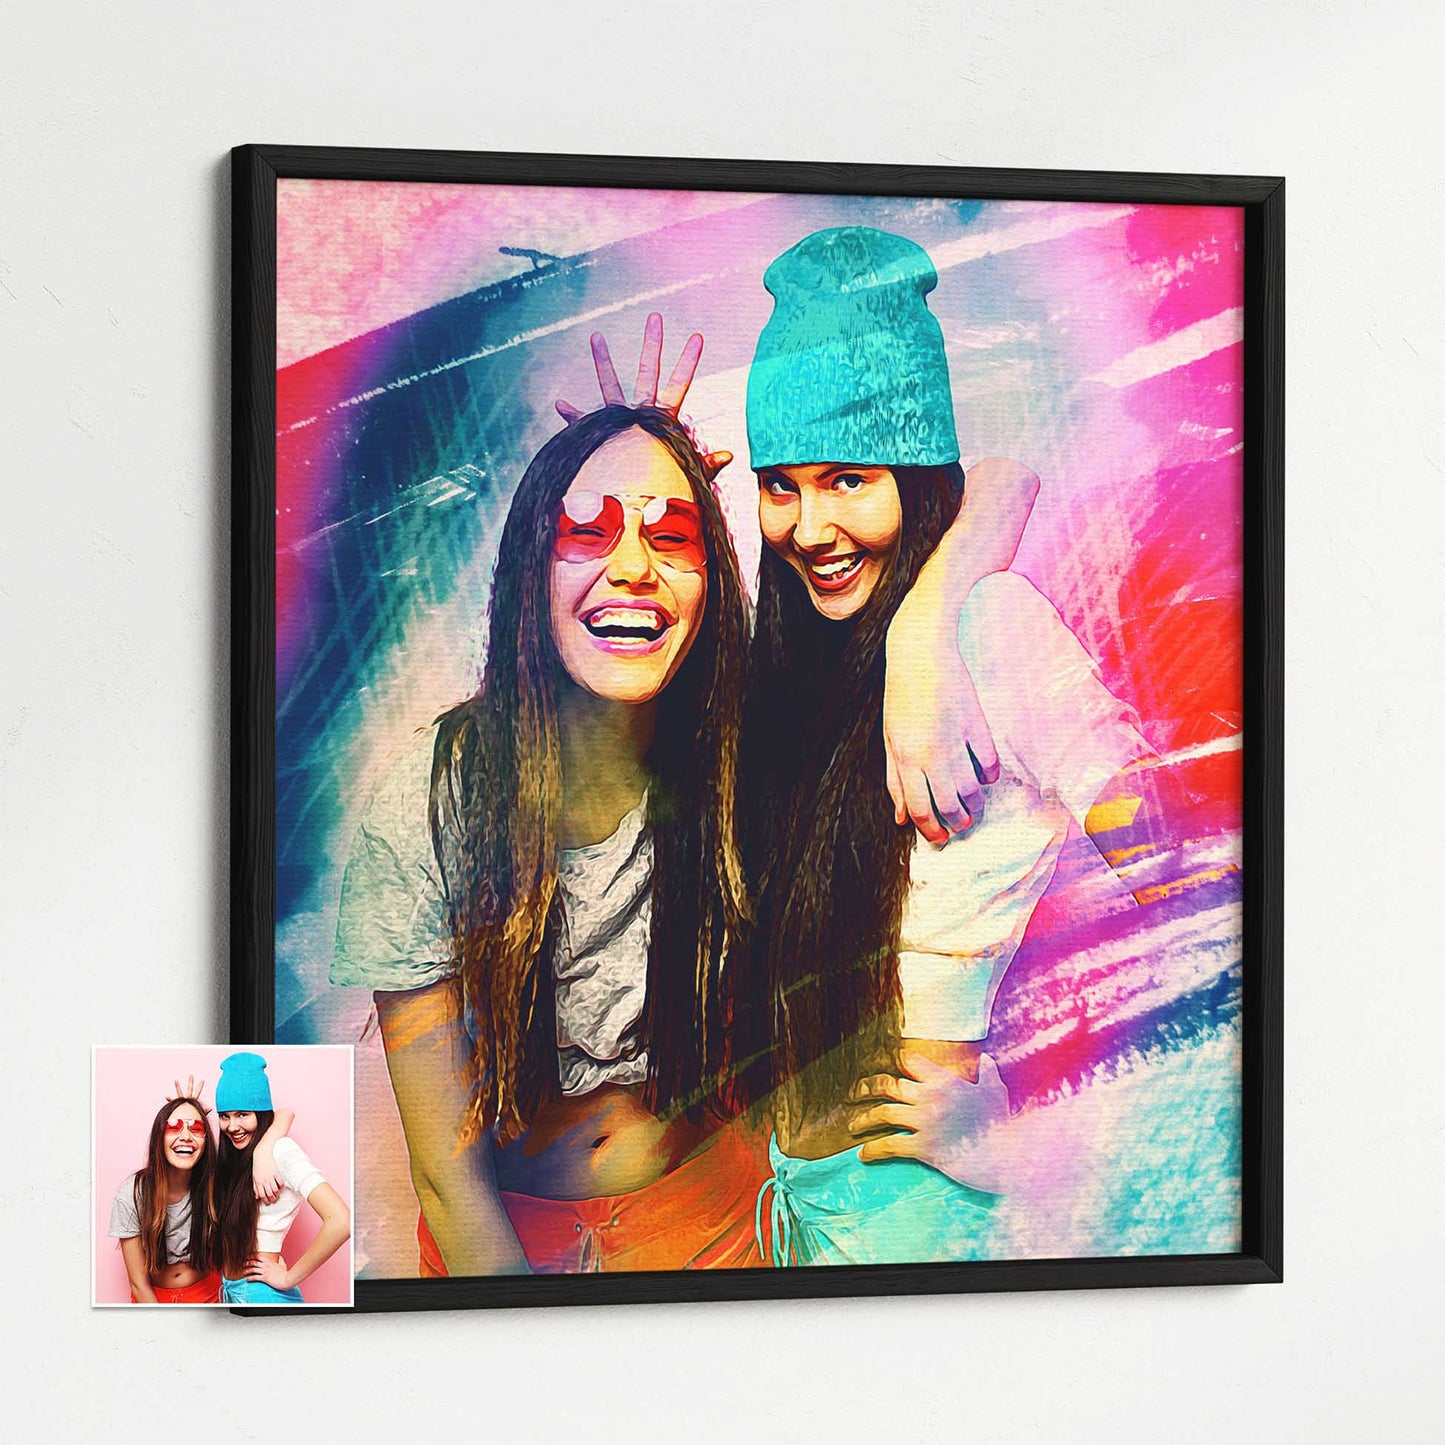 Delight your loved ones with our Personalised Artistic Brush Painting Framed Print. Crafted from a photo, this unique artwork showcases the magic of watercolor style. Its imaginative design and fresh colors evoke a sense of beauty 